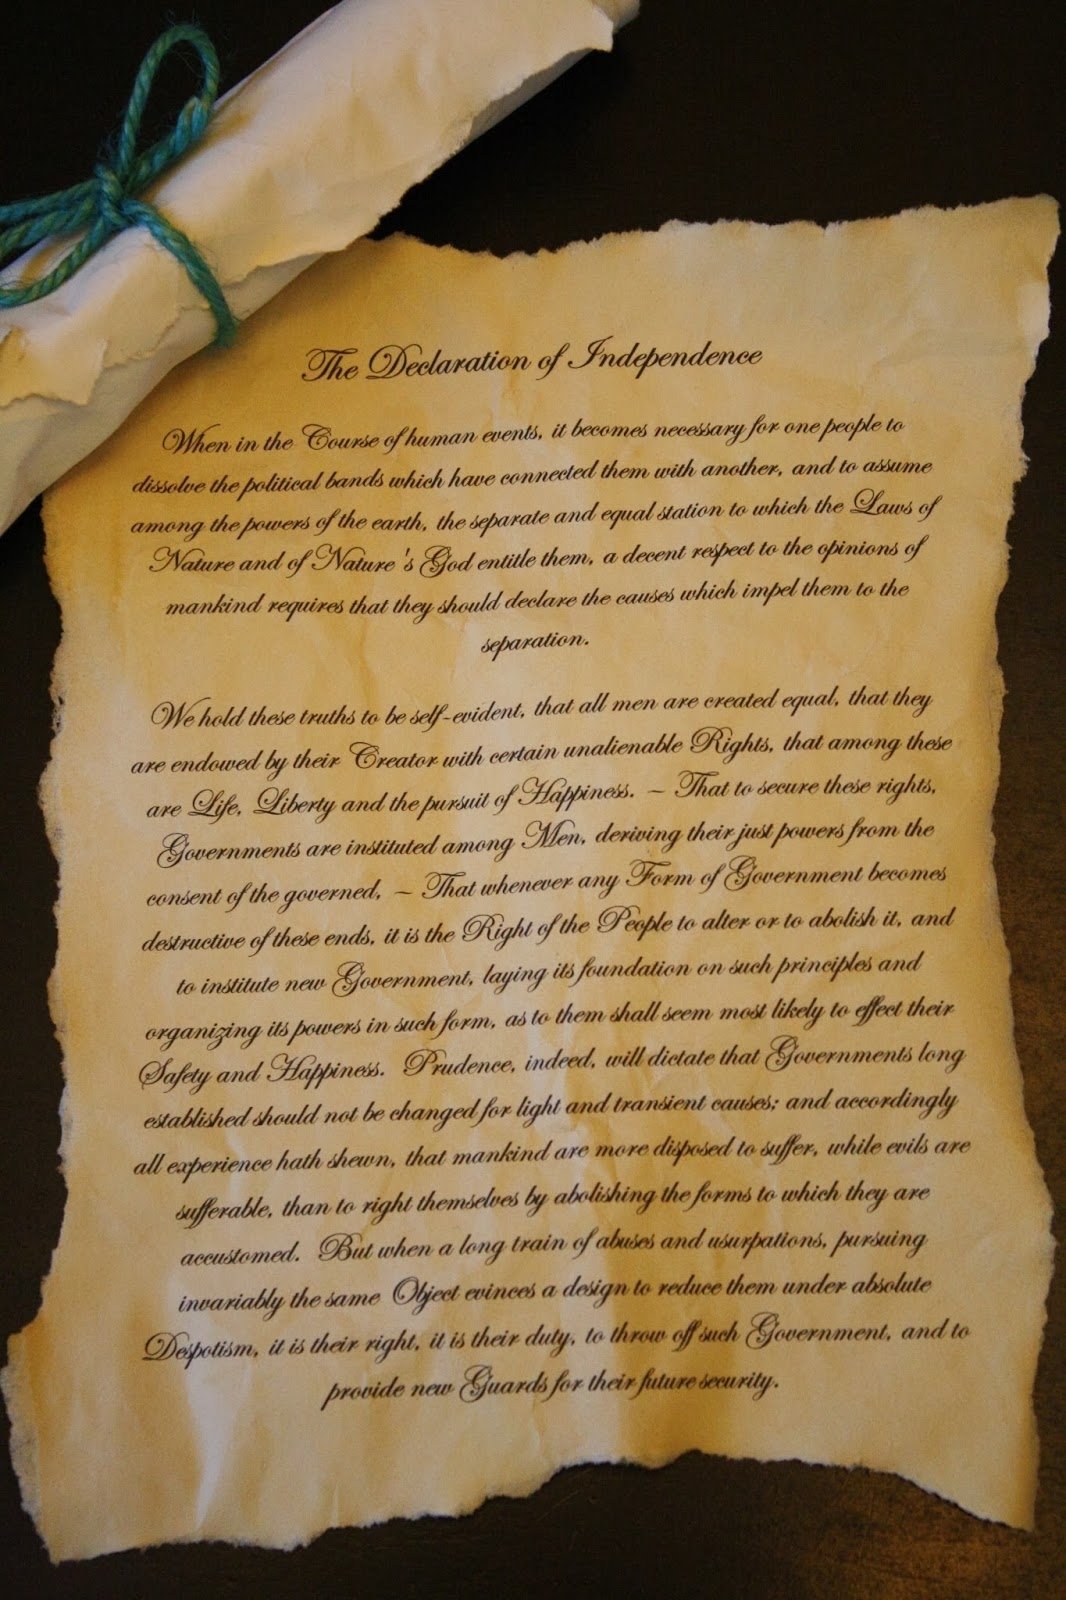 10 Wonderful Ideas In The Declaration Of Independence june 2014 catholic missionary family 2022